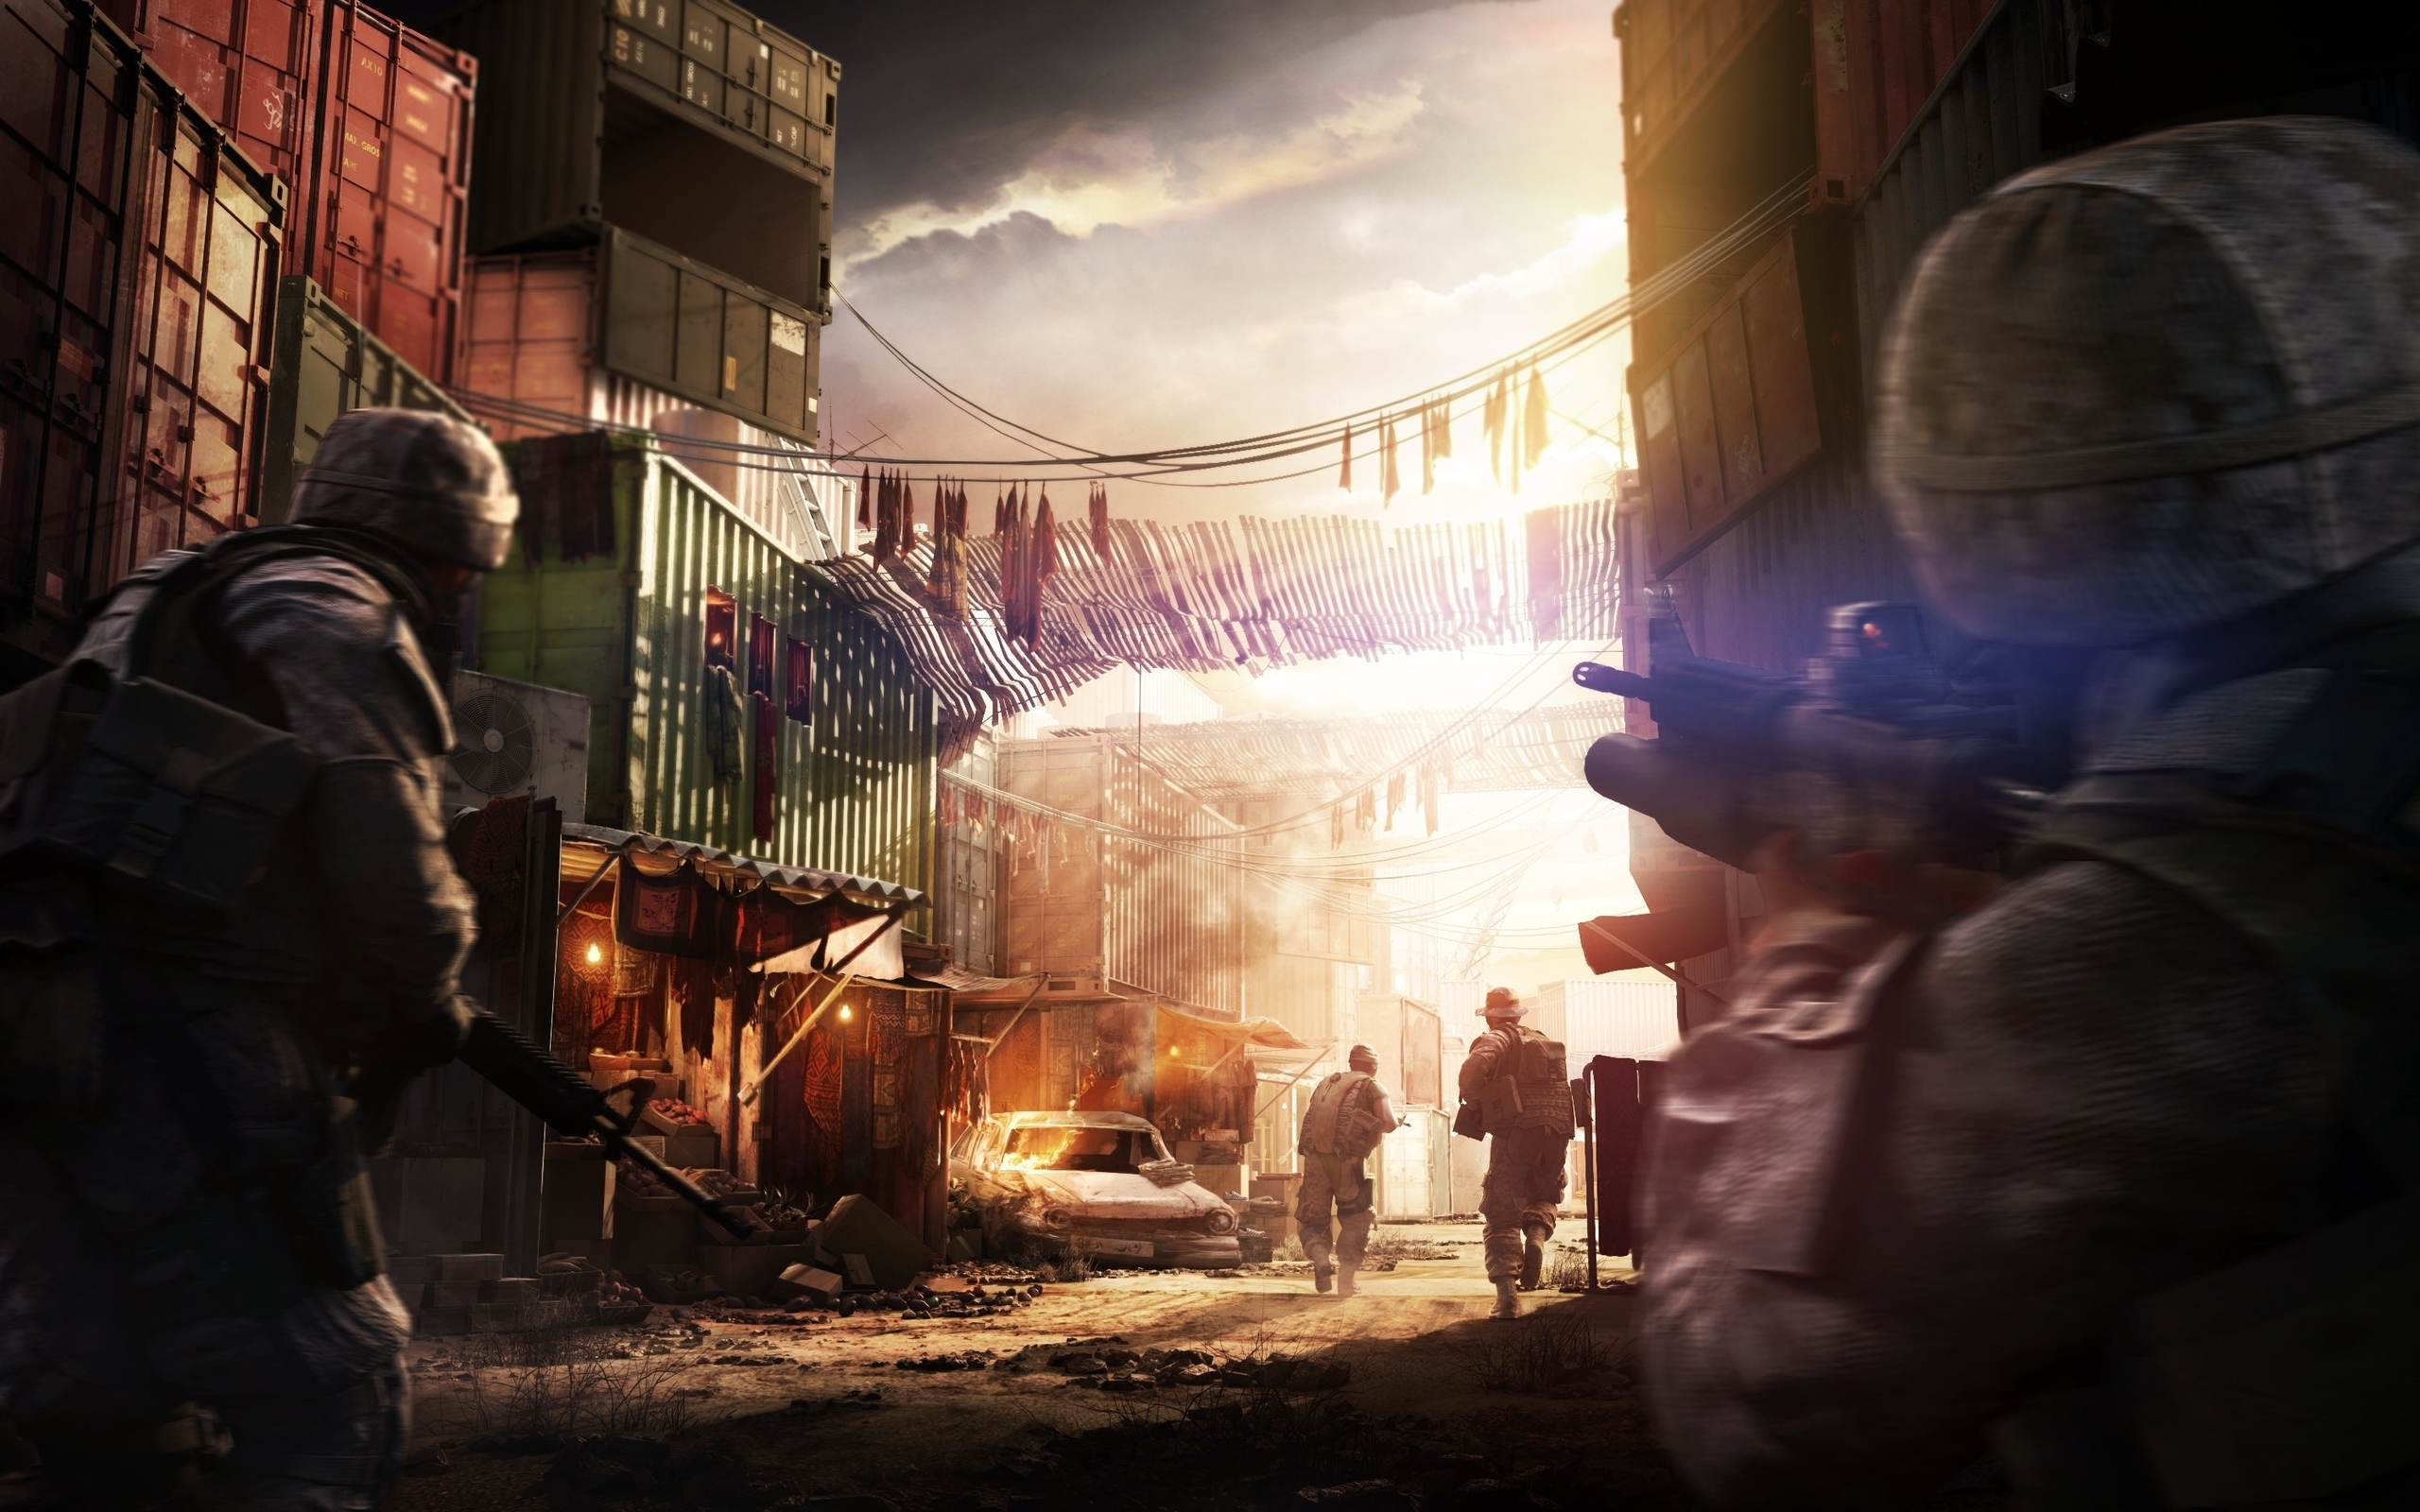 Video Game Operation Flashpoint: Red River HD Wallpaper | Background Image